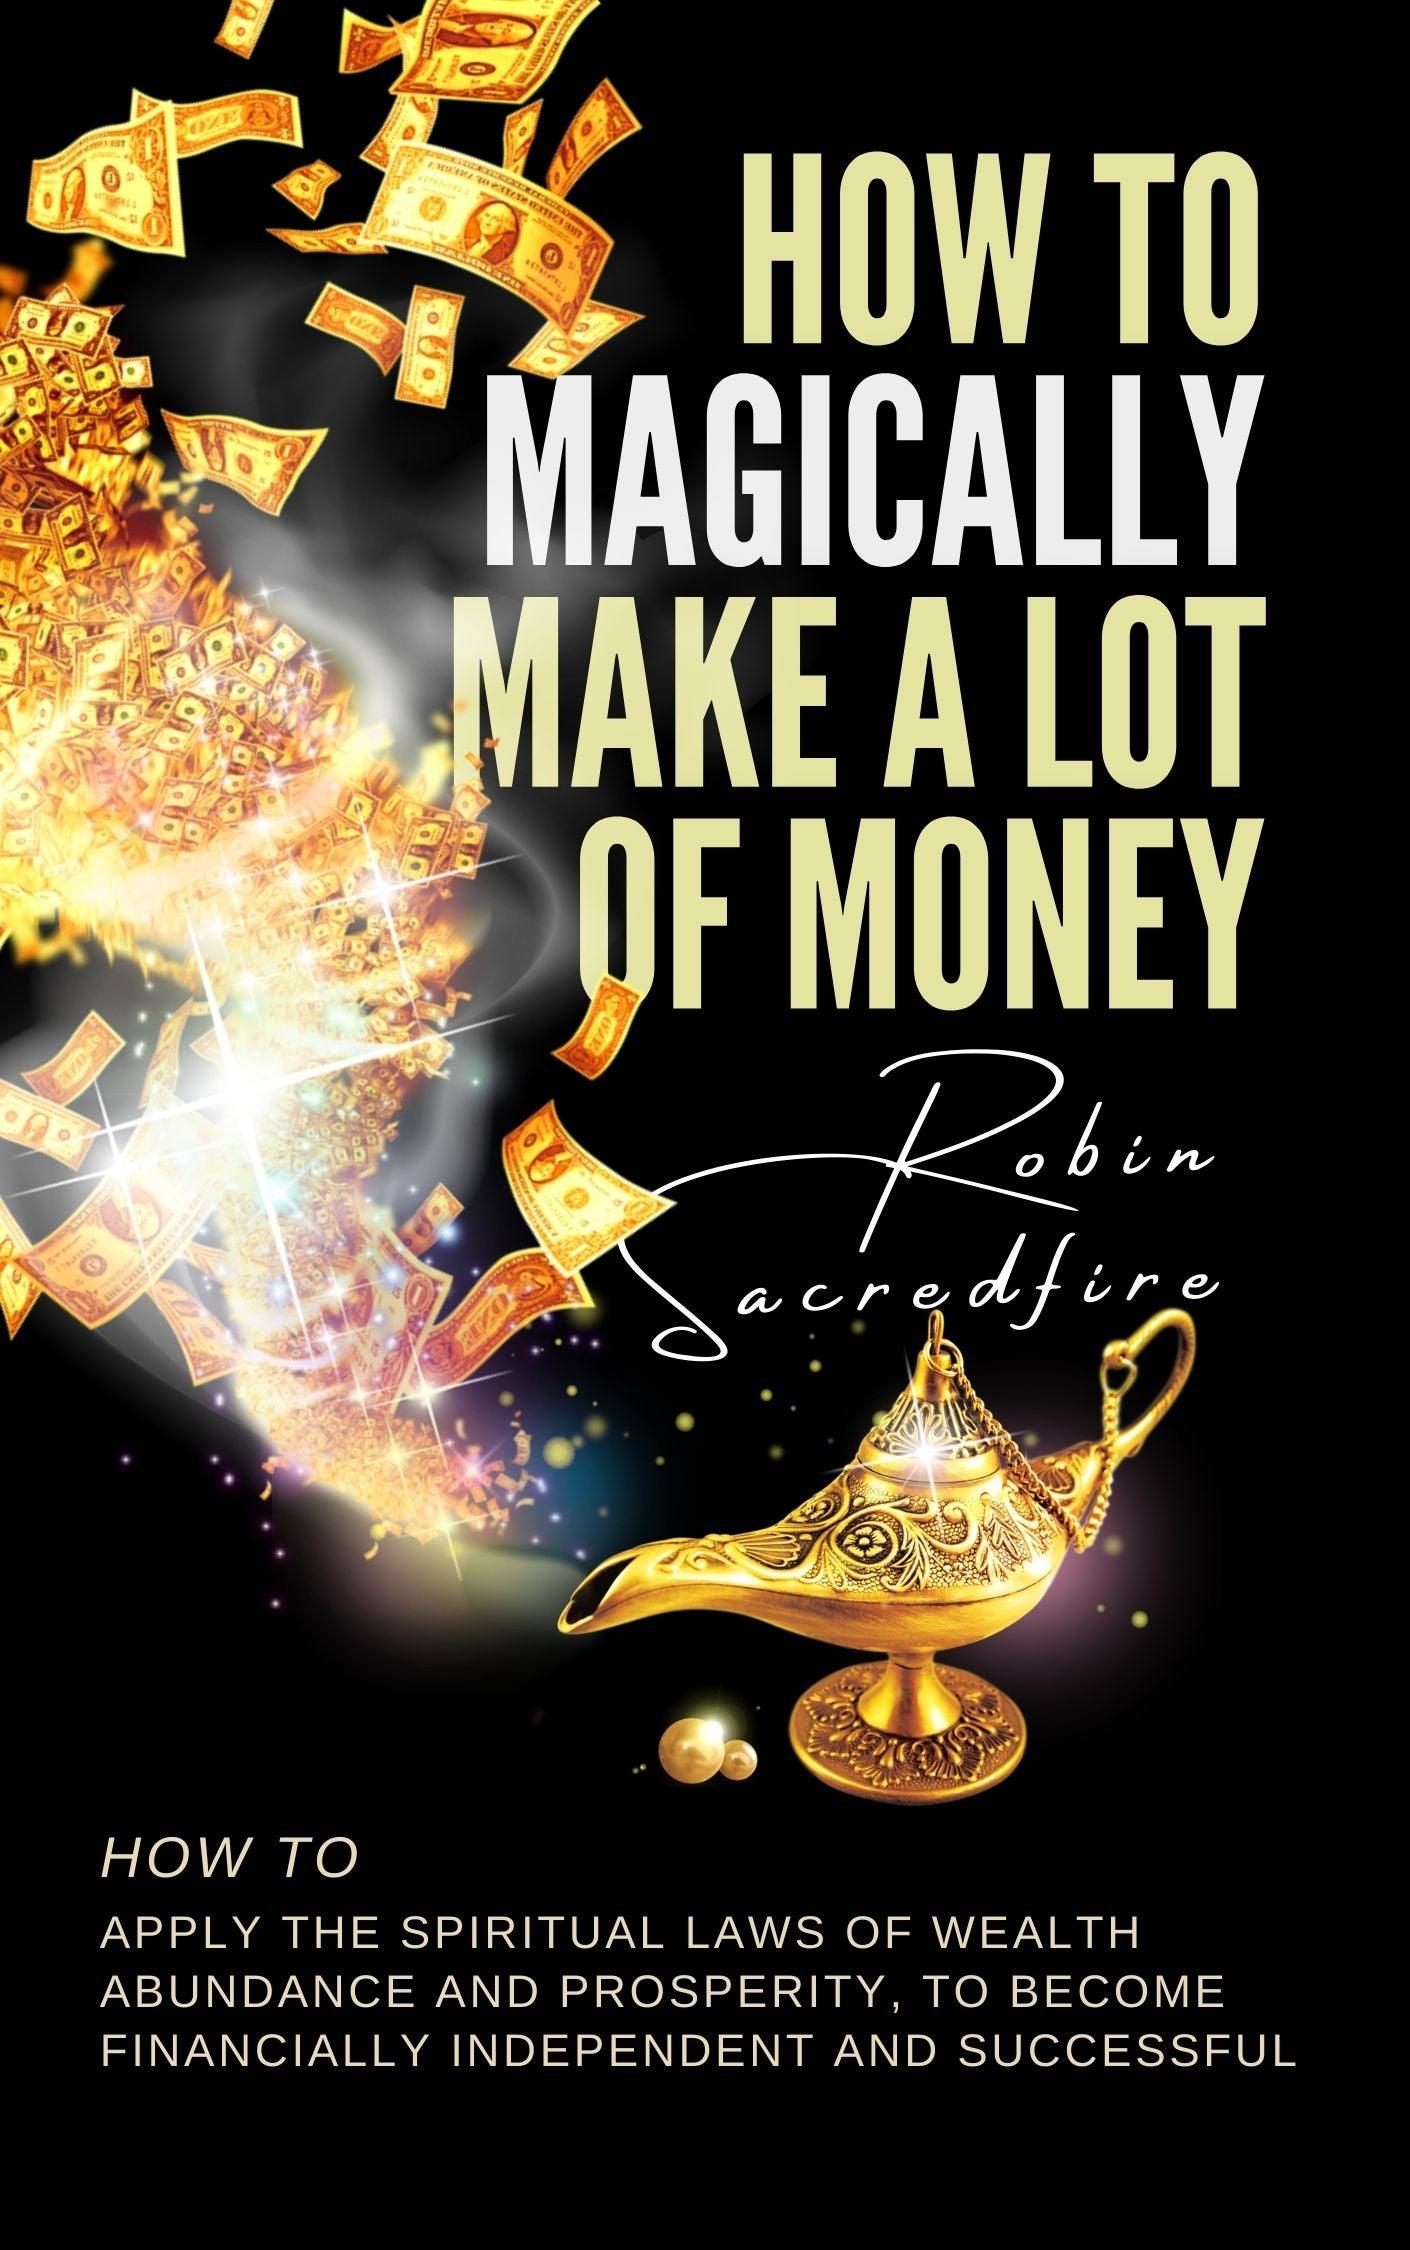 How to Magically Make a Lot of Money - 22 Lions